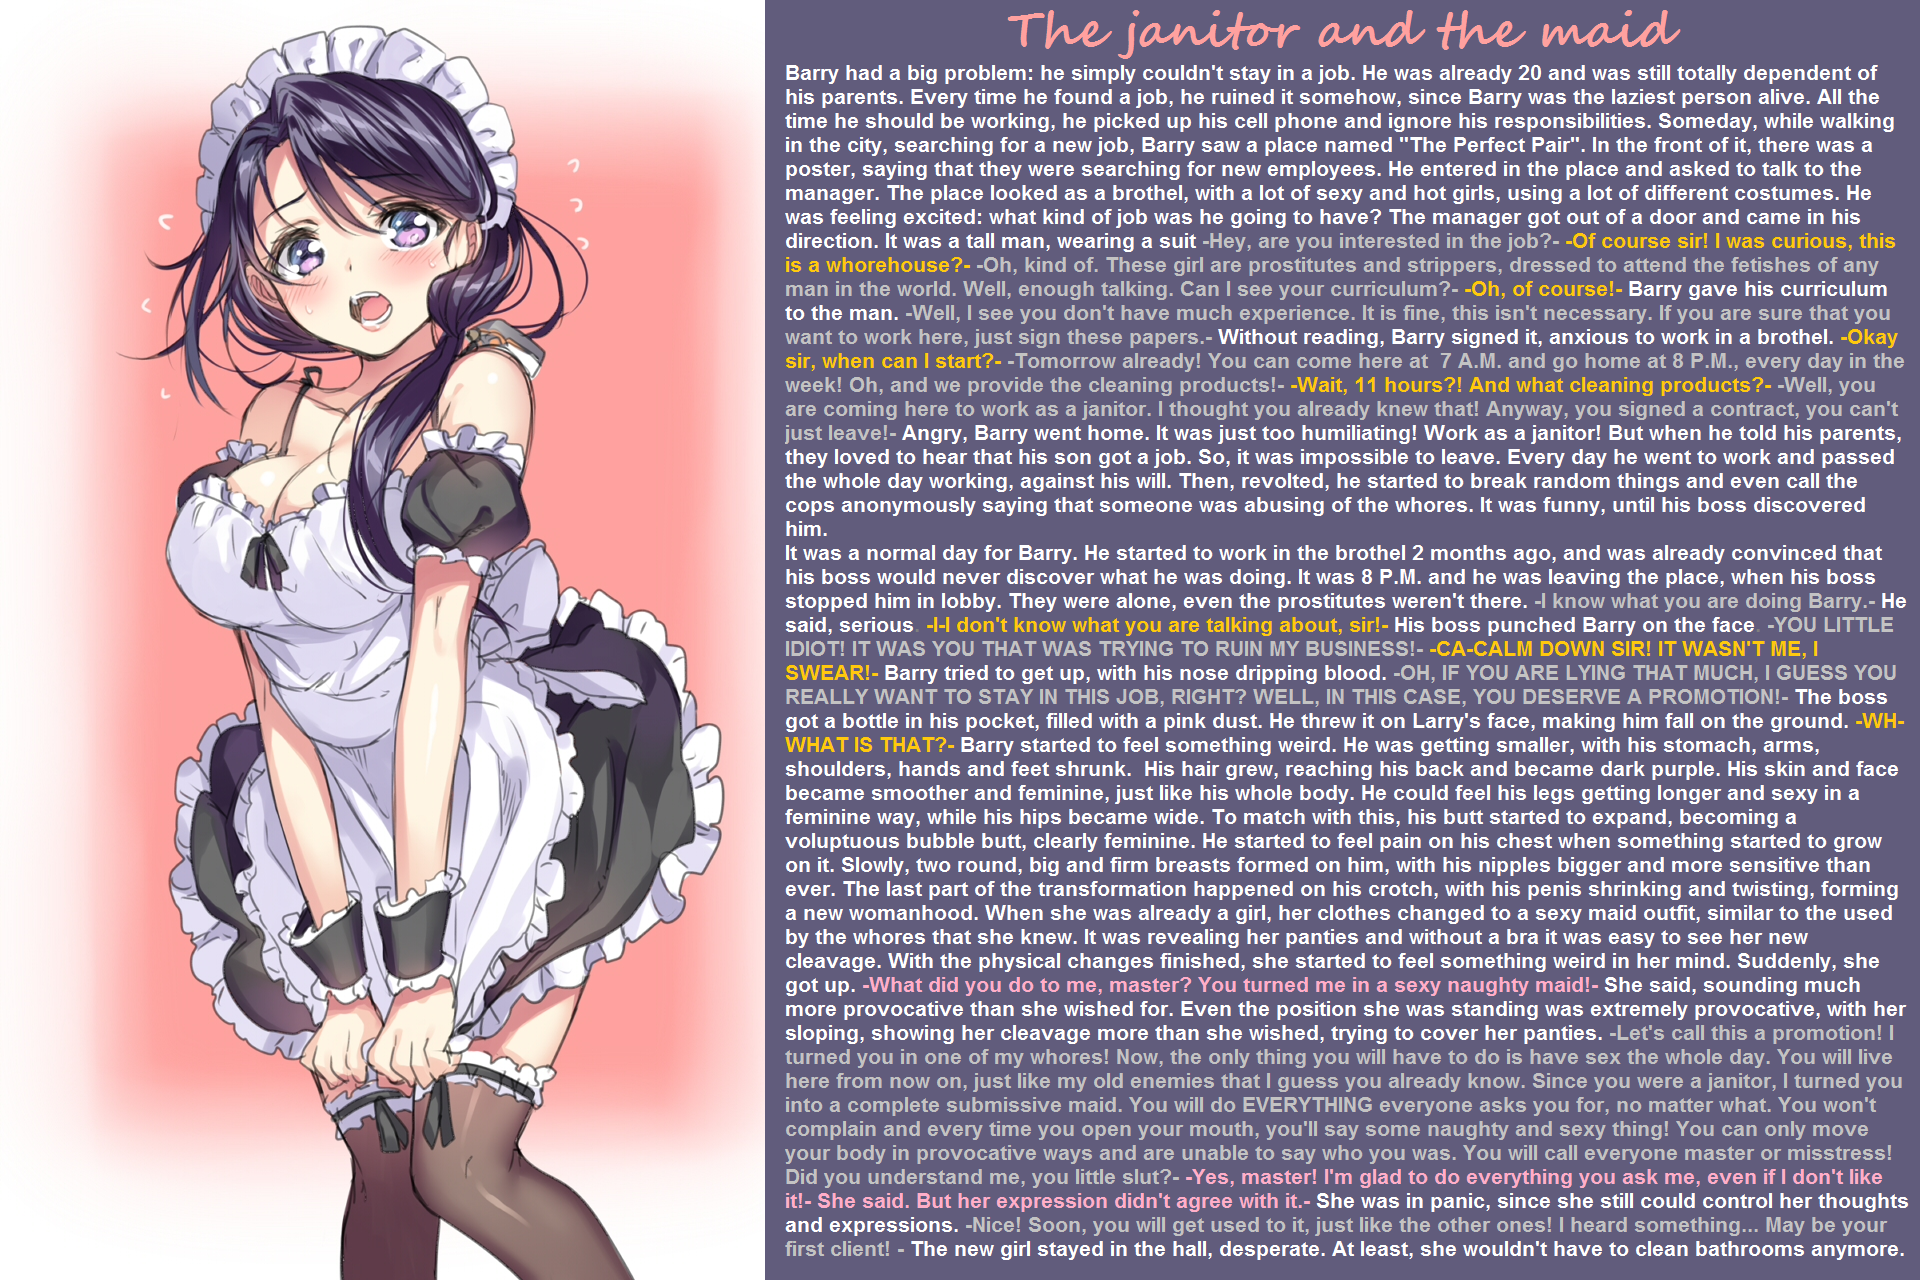 TG Caption - The janitor and the maid.